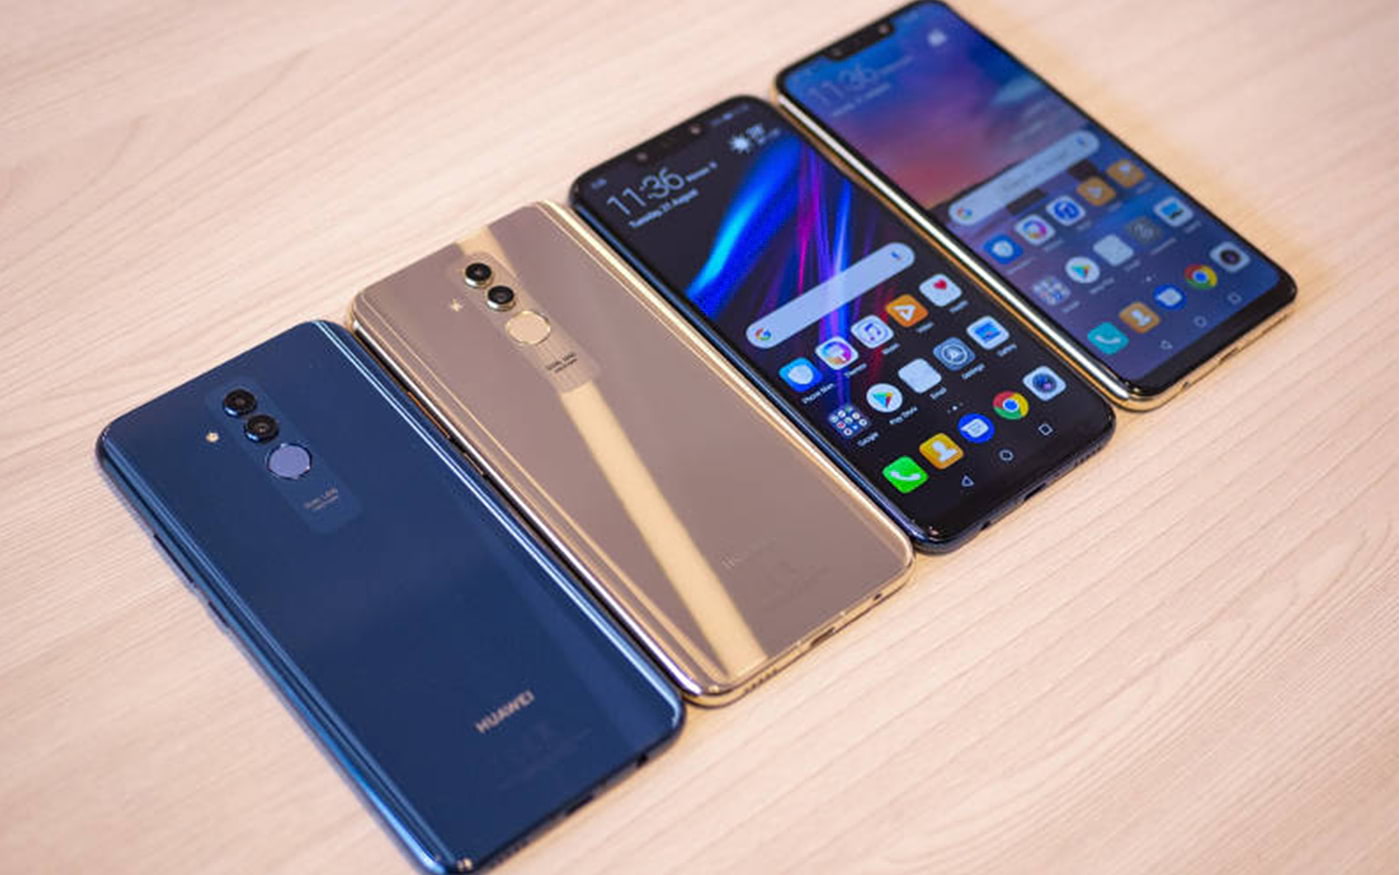 Huawei Mate 20 Lite gets EMUI 10 based on Android 10